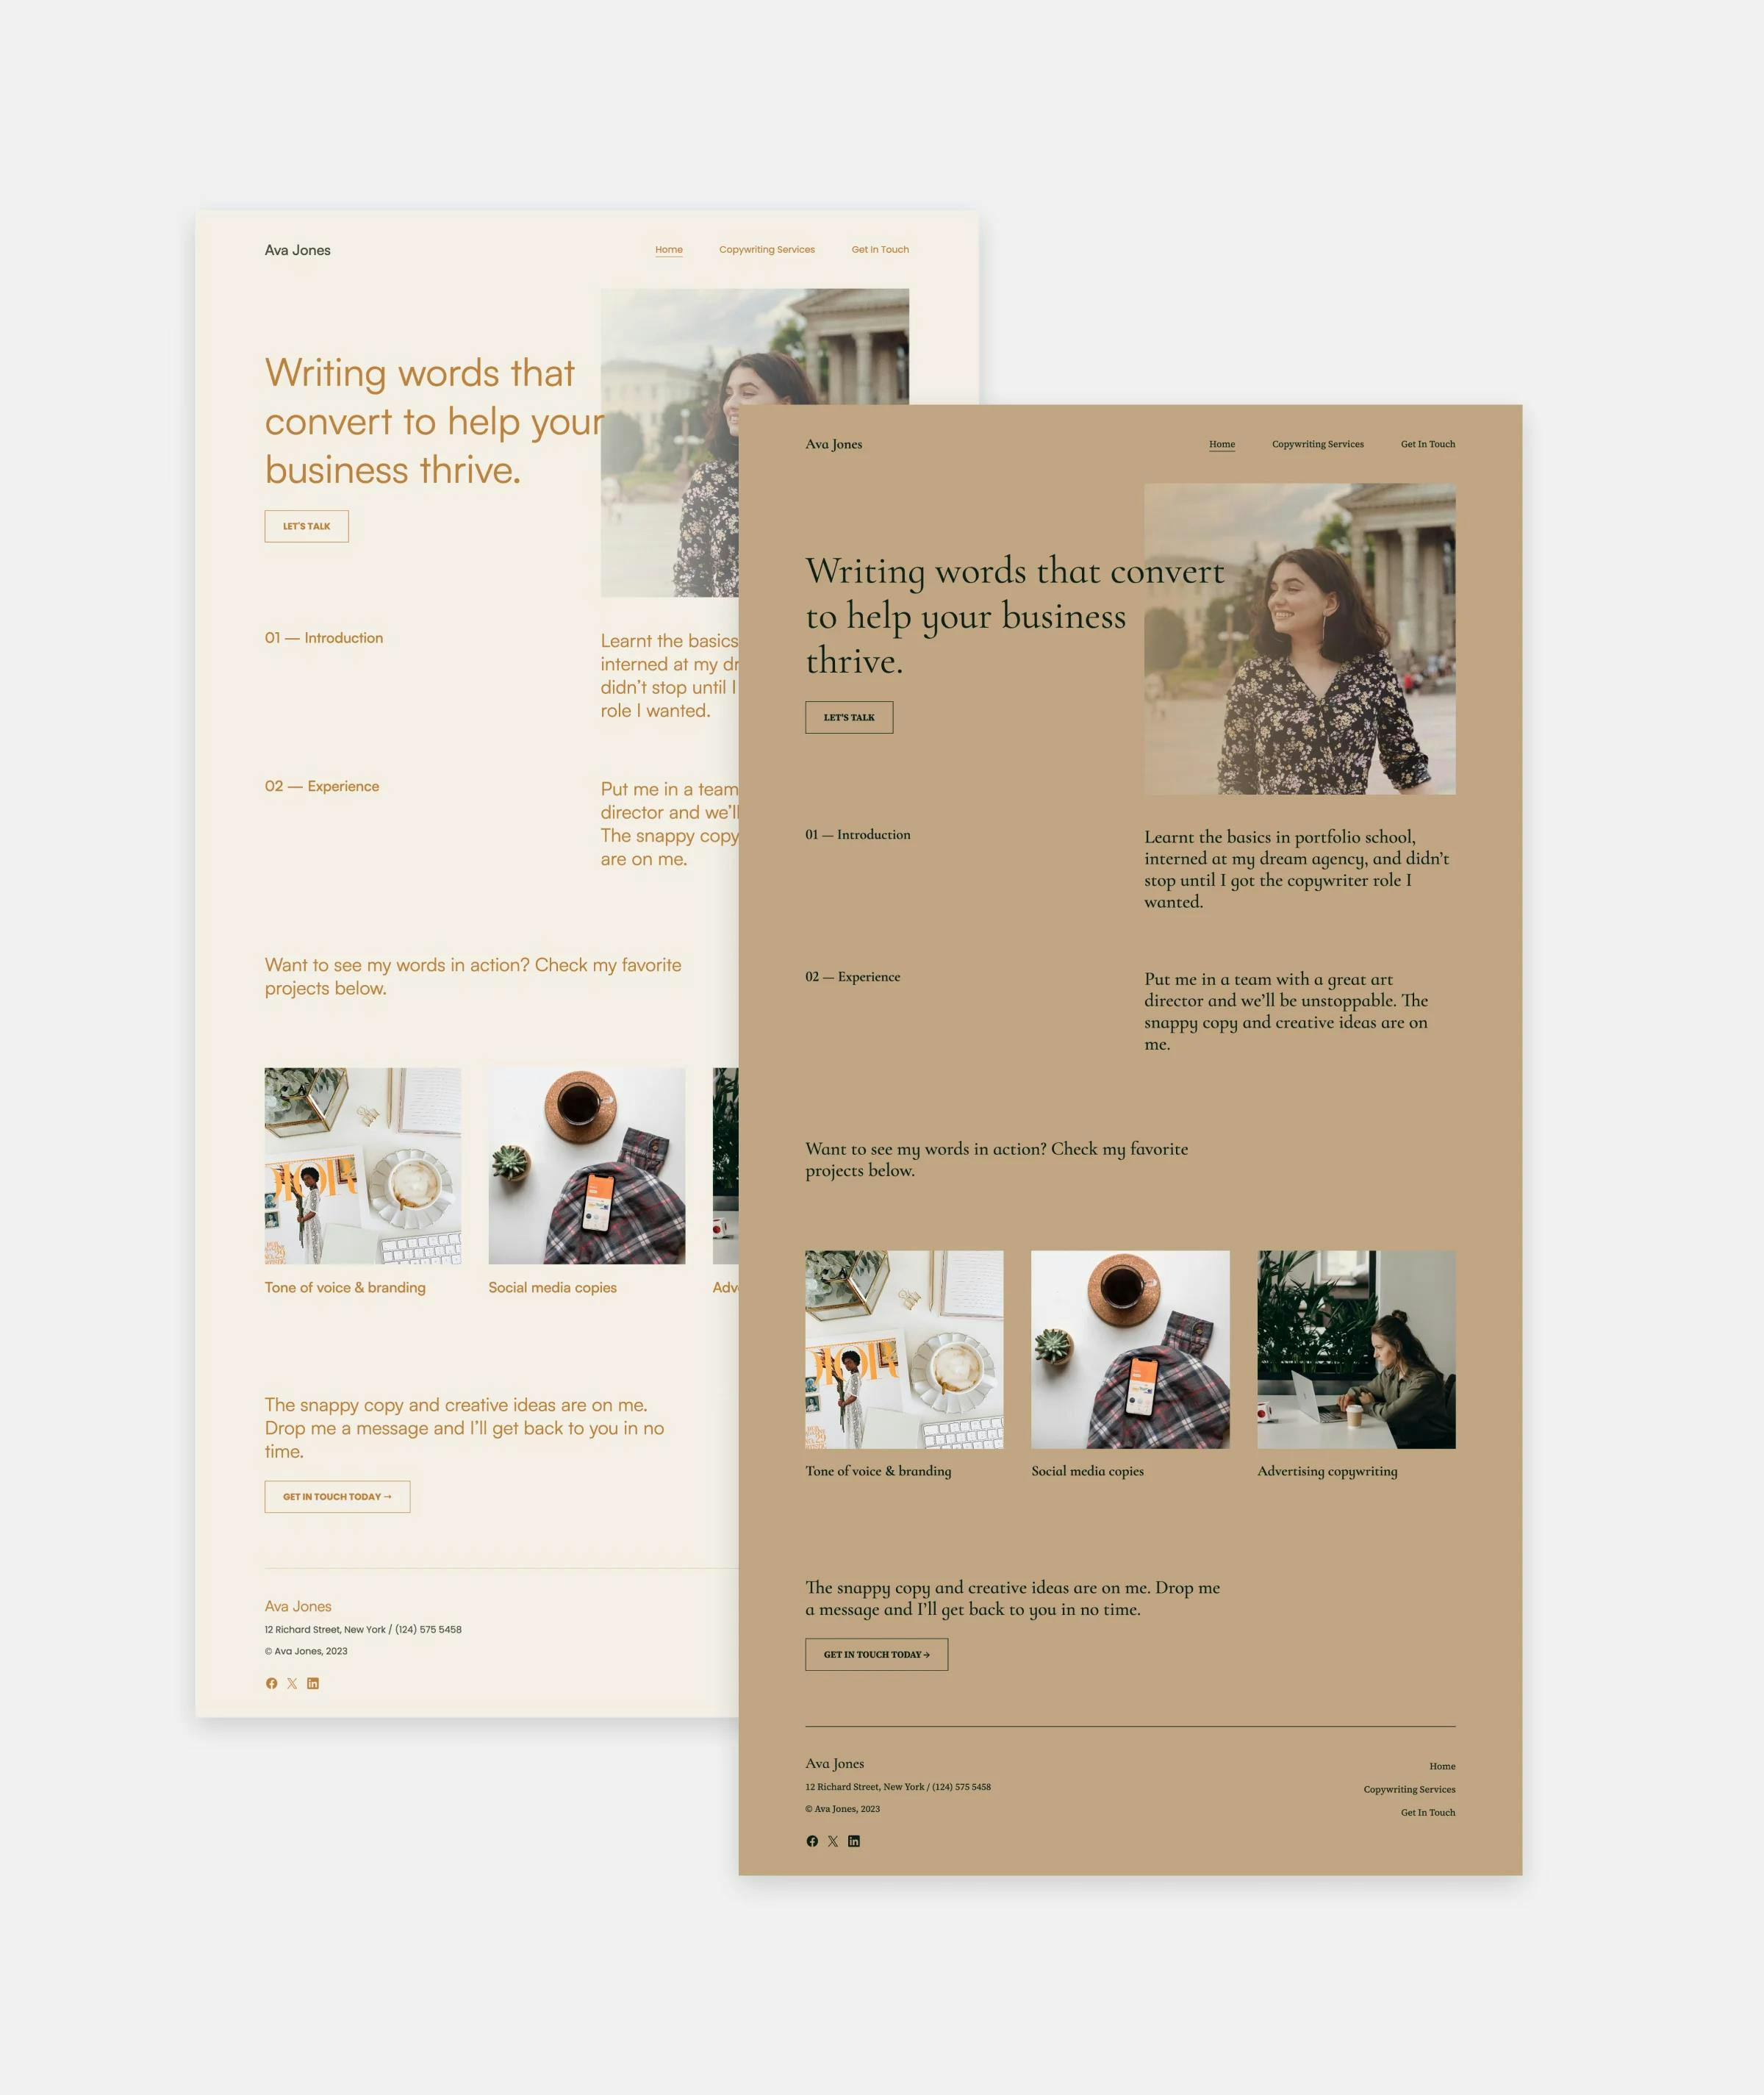 Copyfolio's "Premier" portfolio template, shown with two different color palettes and font presets.